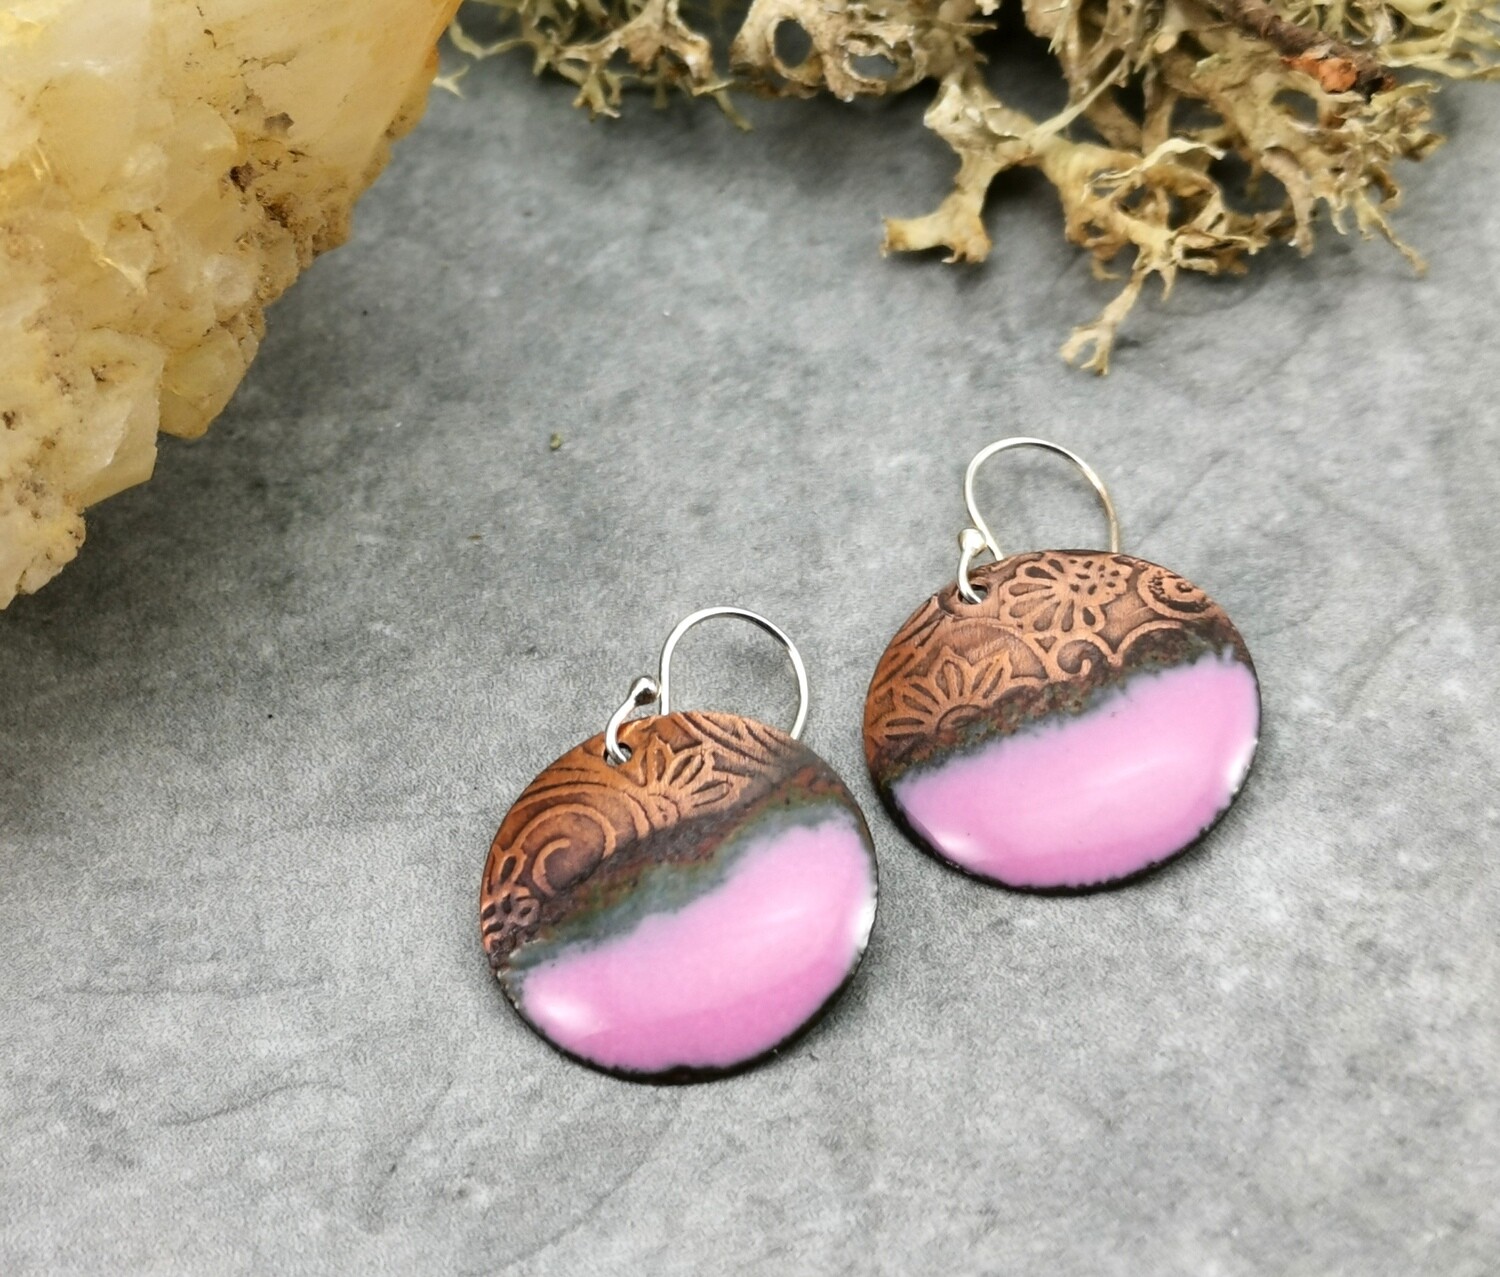 Patterned Copper Earrings with Pink Torch Fired Enamel, Gifts for Her, Gifts for Woman, Gifts, Handmade Fashion Jewelry